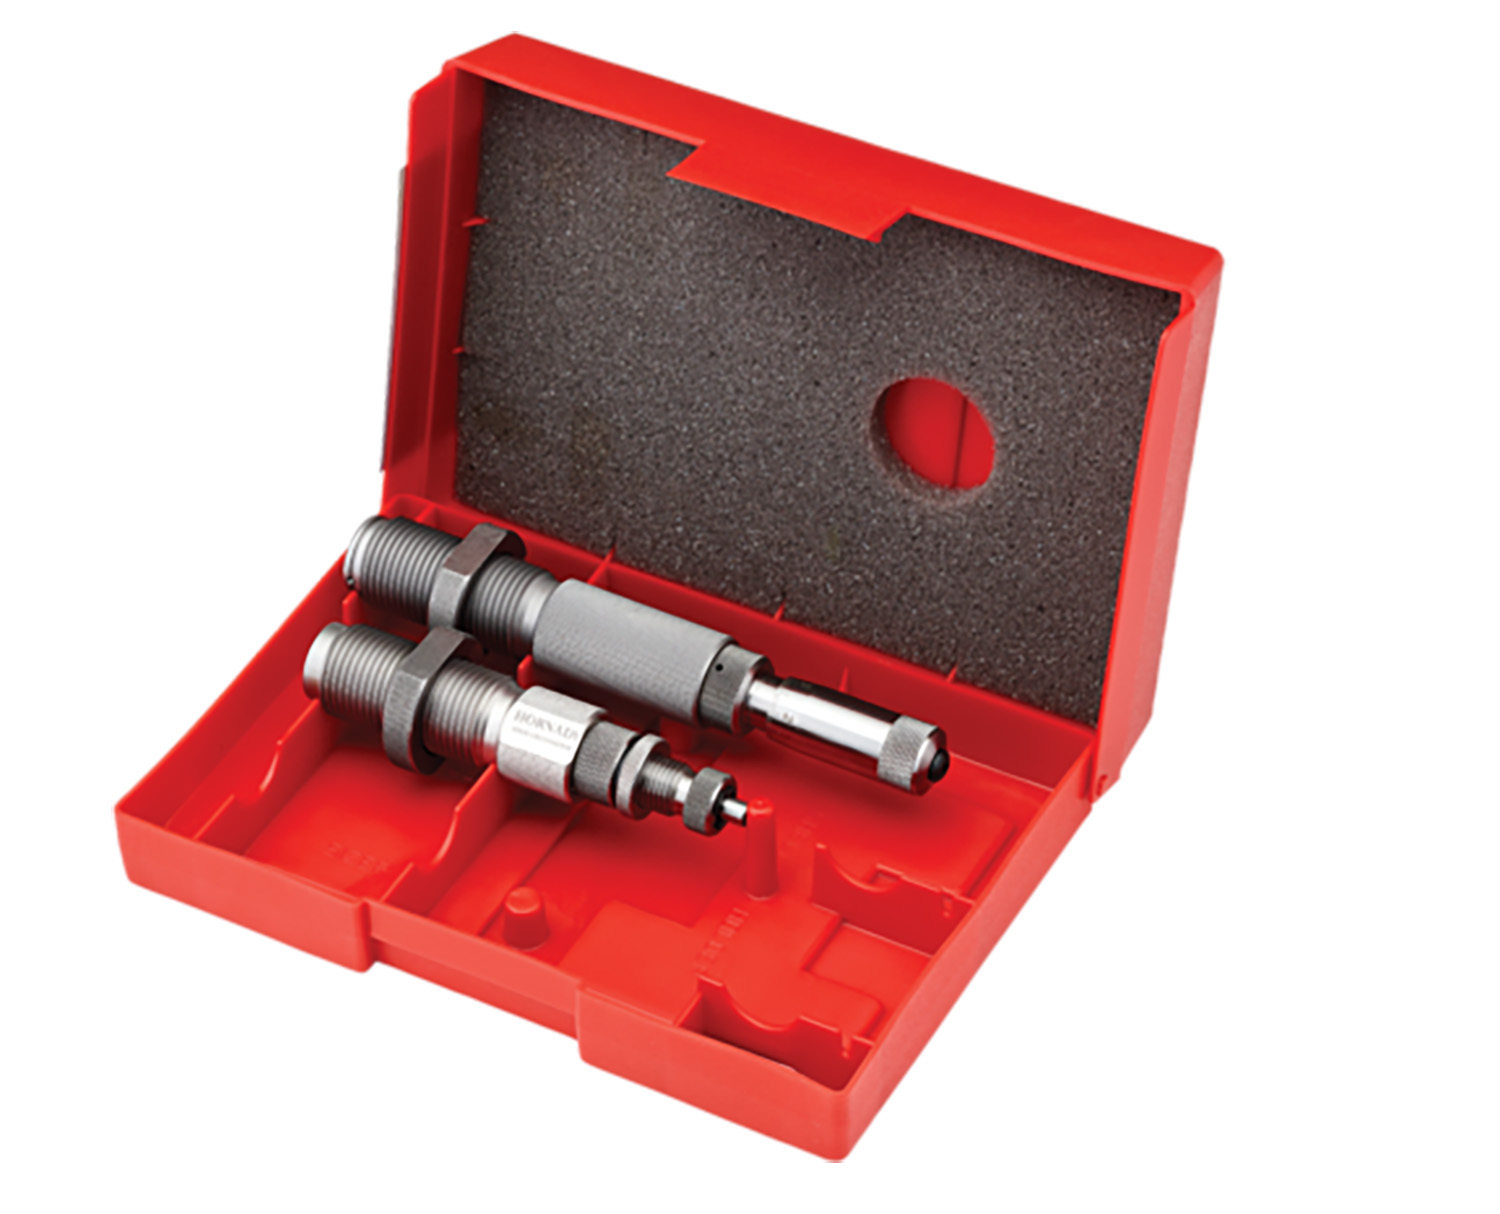 Hornady 544319 Match Grade 2 Die Set for 7mm PRC Includes Bushing/Seater